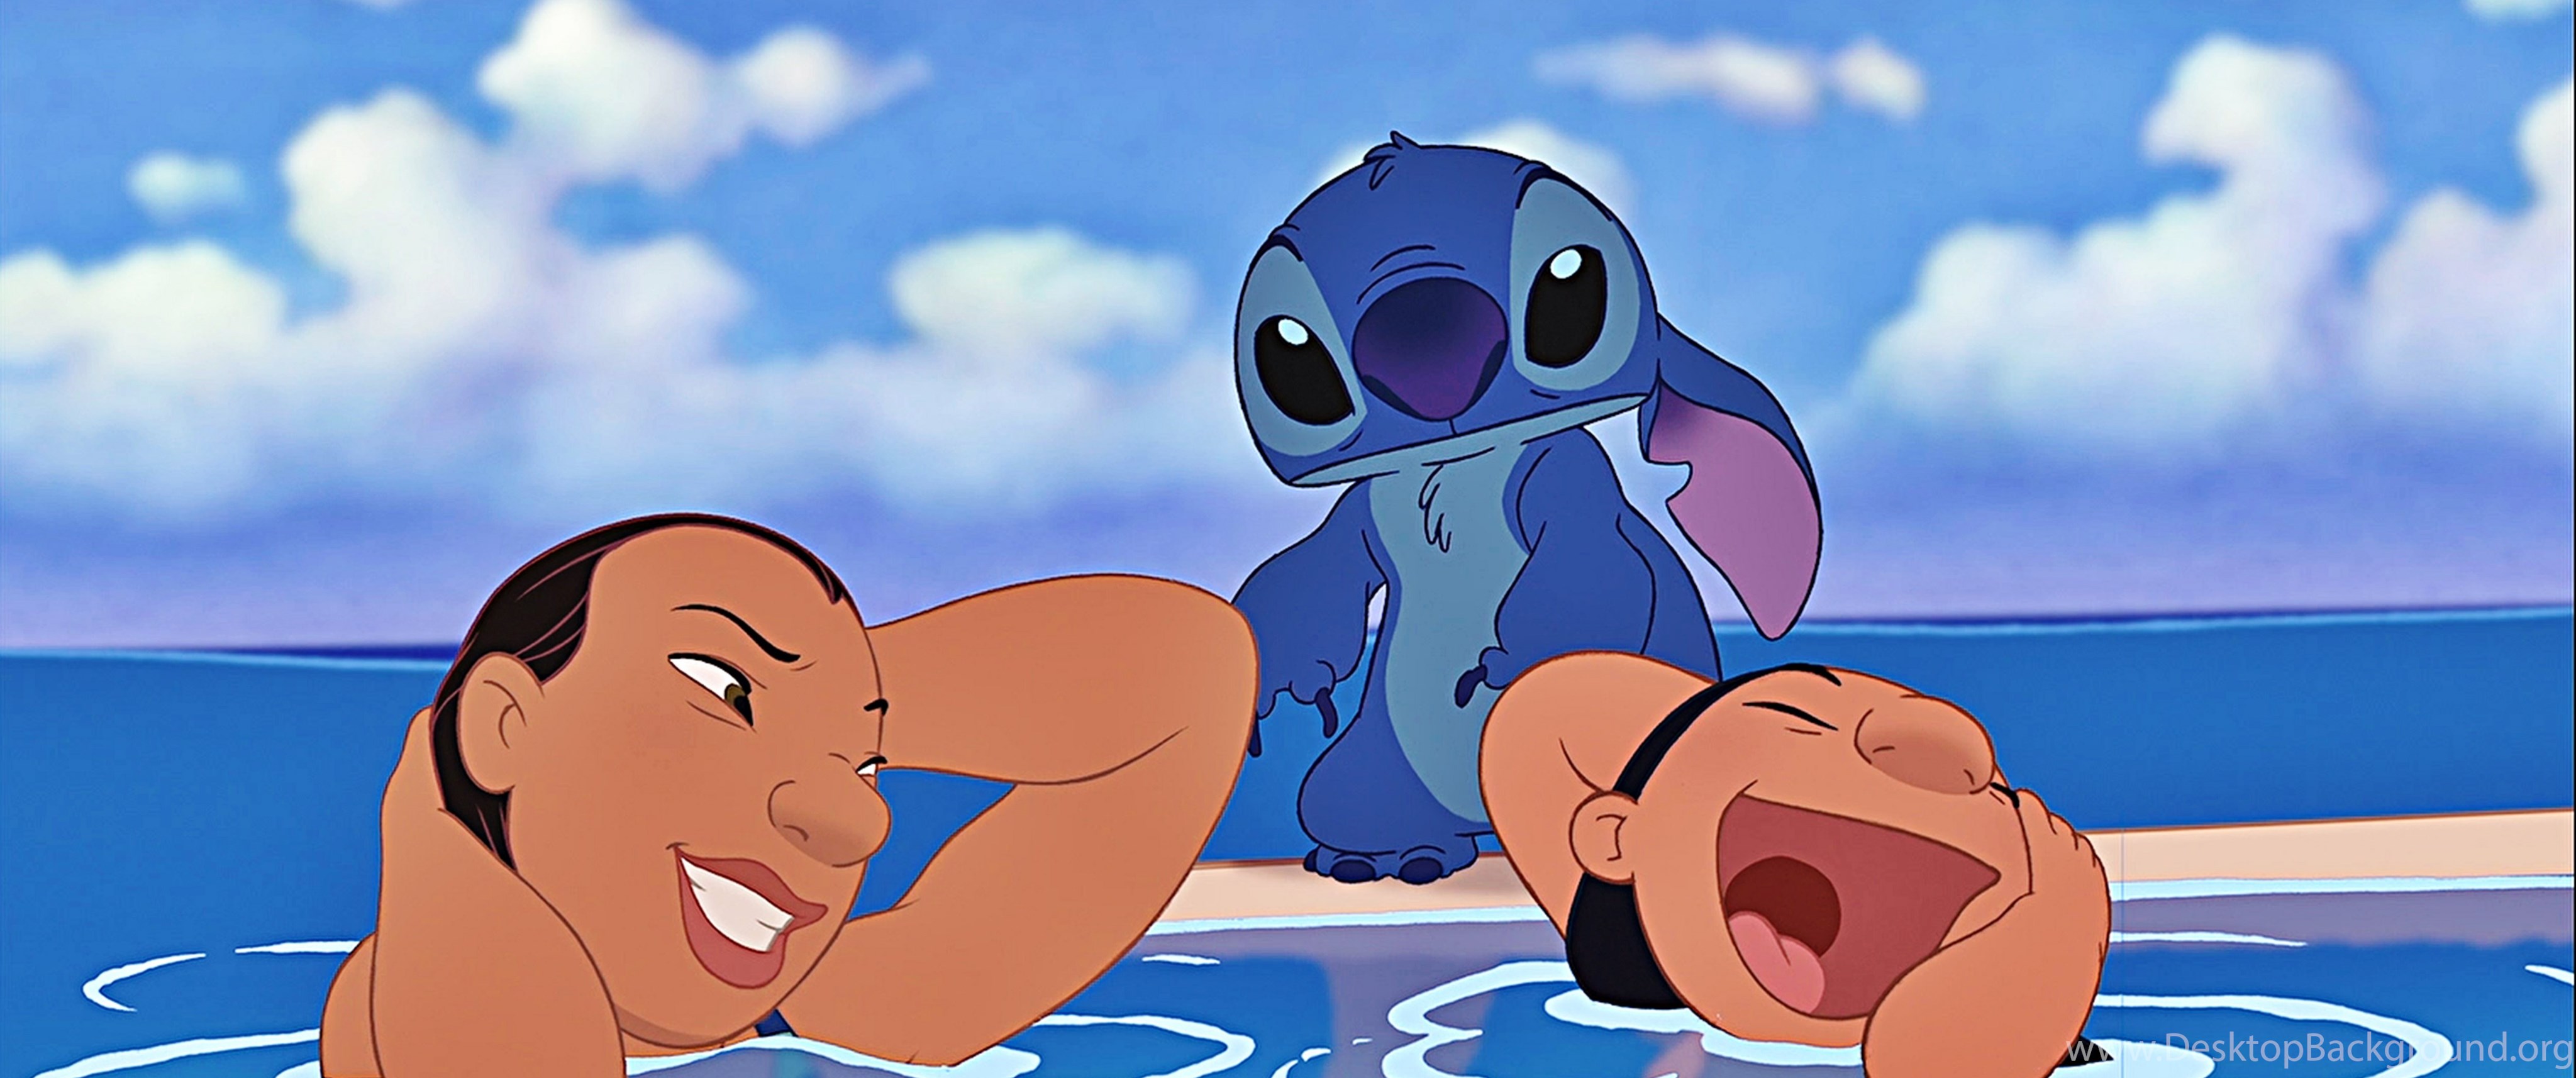 Download Lilo And Stitch Wallpapers HD For iPhone And Android IPhone2Lovely...